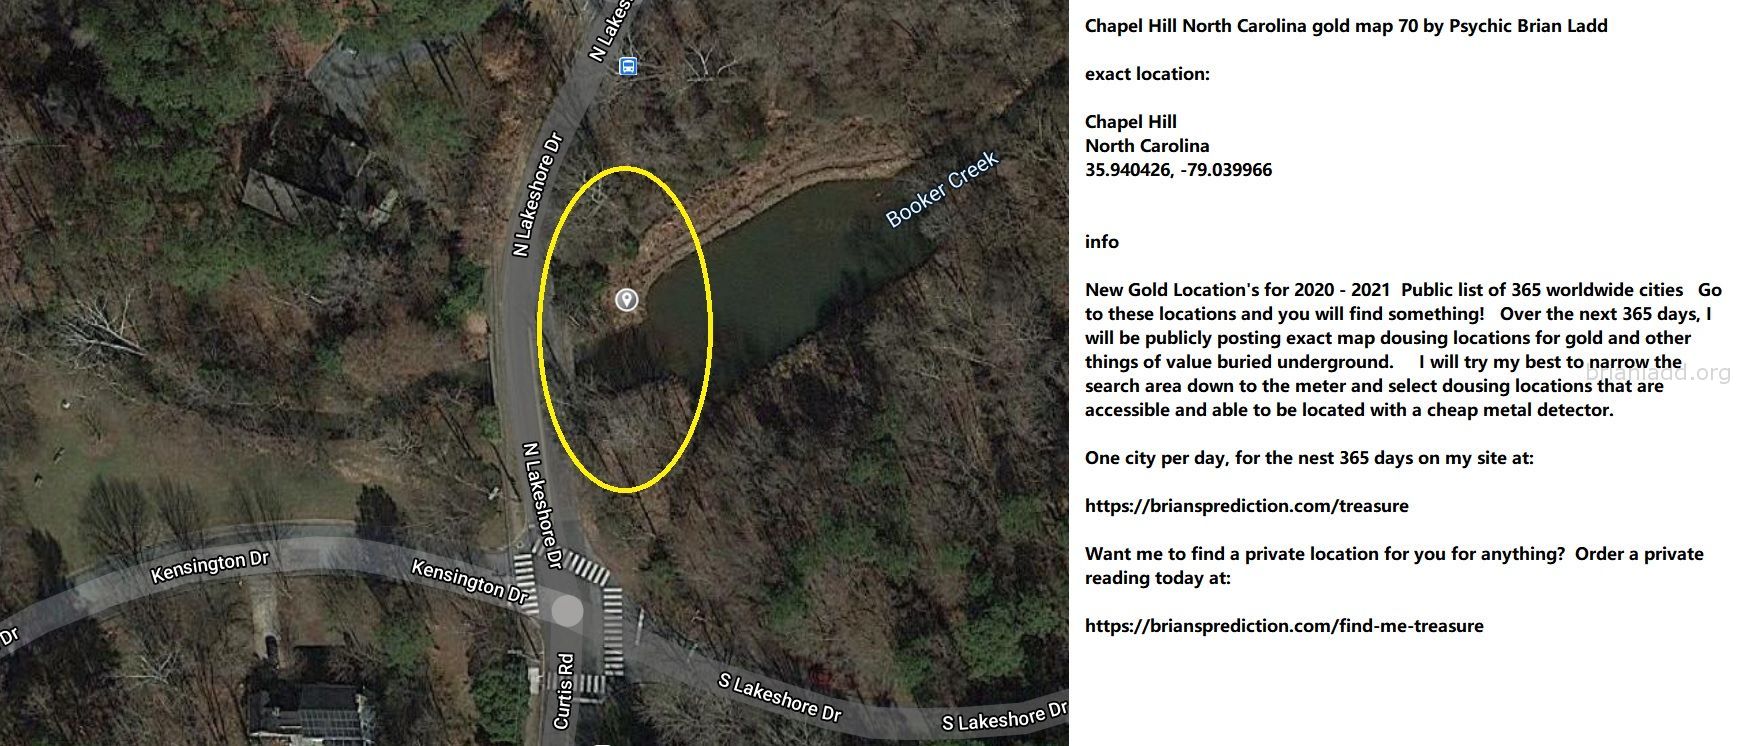 Chapel Hill North Carolina Gold Map 70 By Psychic Brian Ladd - Chapel Hill North Carolina Gold Map 70 By Psychic Brian L...
Chapel Hill North Carolina Gold Map 70 By Psychic Brian Ladd  Exact Location:  Chapel Hill  North Carolina  35.940426, -79.039966  Info  New Gold Location'S For 2020 - 2021  Public List Of 365 Worldwide Cities  Go To These Locations And You Will Find Something!  Over The Next 365 Days, I Will Be Publicly Posting Exact Map Dousing Locations For Gold And Other Things Of Value Buried Underground.  I Will Try My Best To Narrow The Search Area Down To The Meter And Select Dousing Locations That Are Accessible And Able To Be Located With A Cheap Metal Detector.  One City Per Day, For The Nest 365 Days On My Site At:   https://briansprediction.com/Treasure  Want Me To Find A Private Location For You For Anything?  Order A Private Reading Today At:   https://briansprediction.com/Find-Me-Treasure
